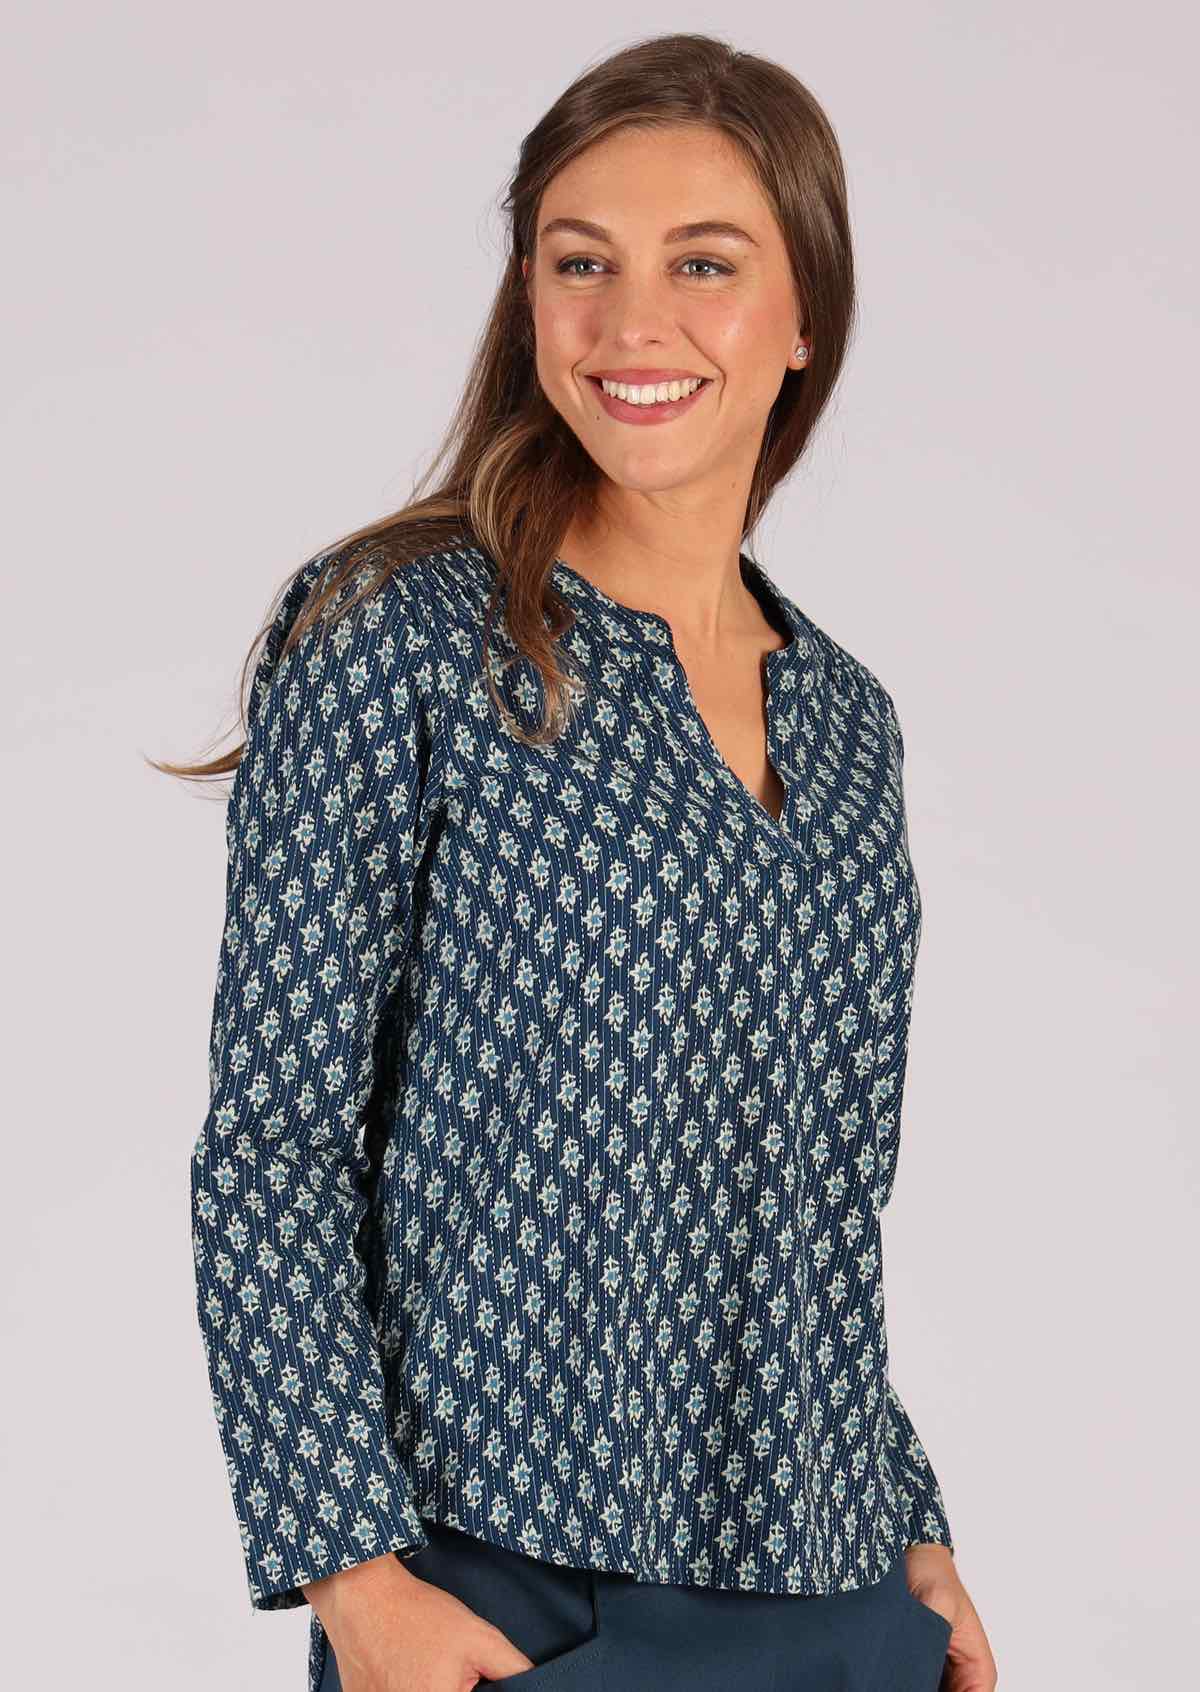 Long sleeve cotton top is great for work and play